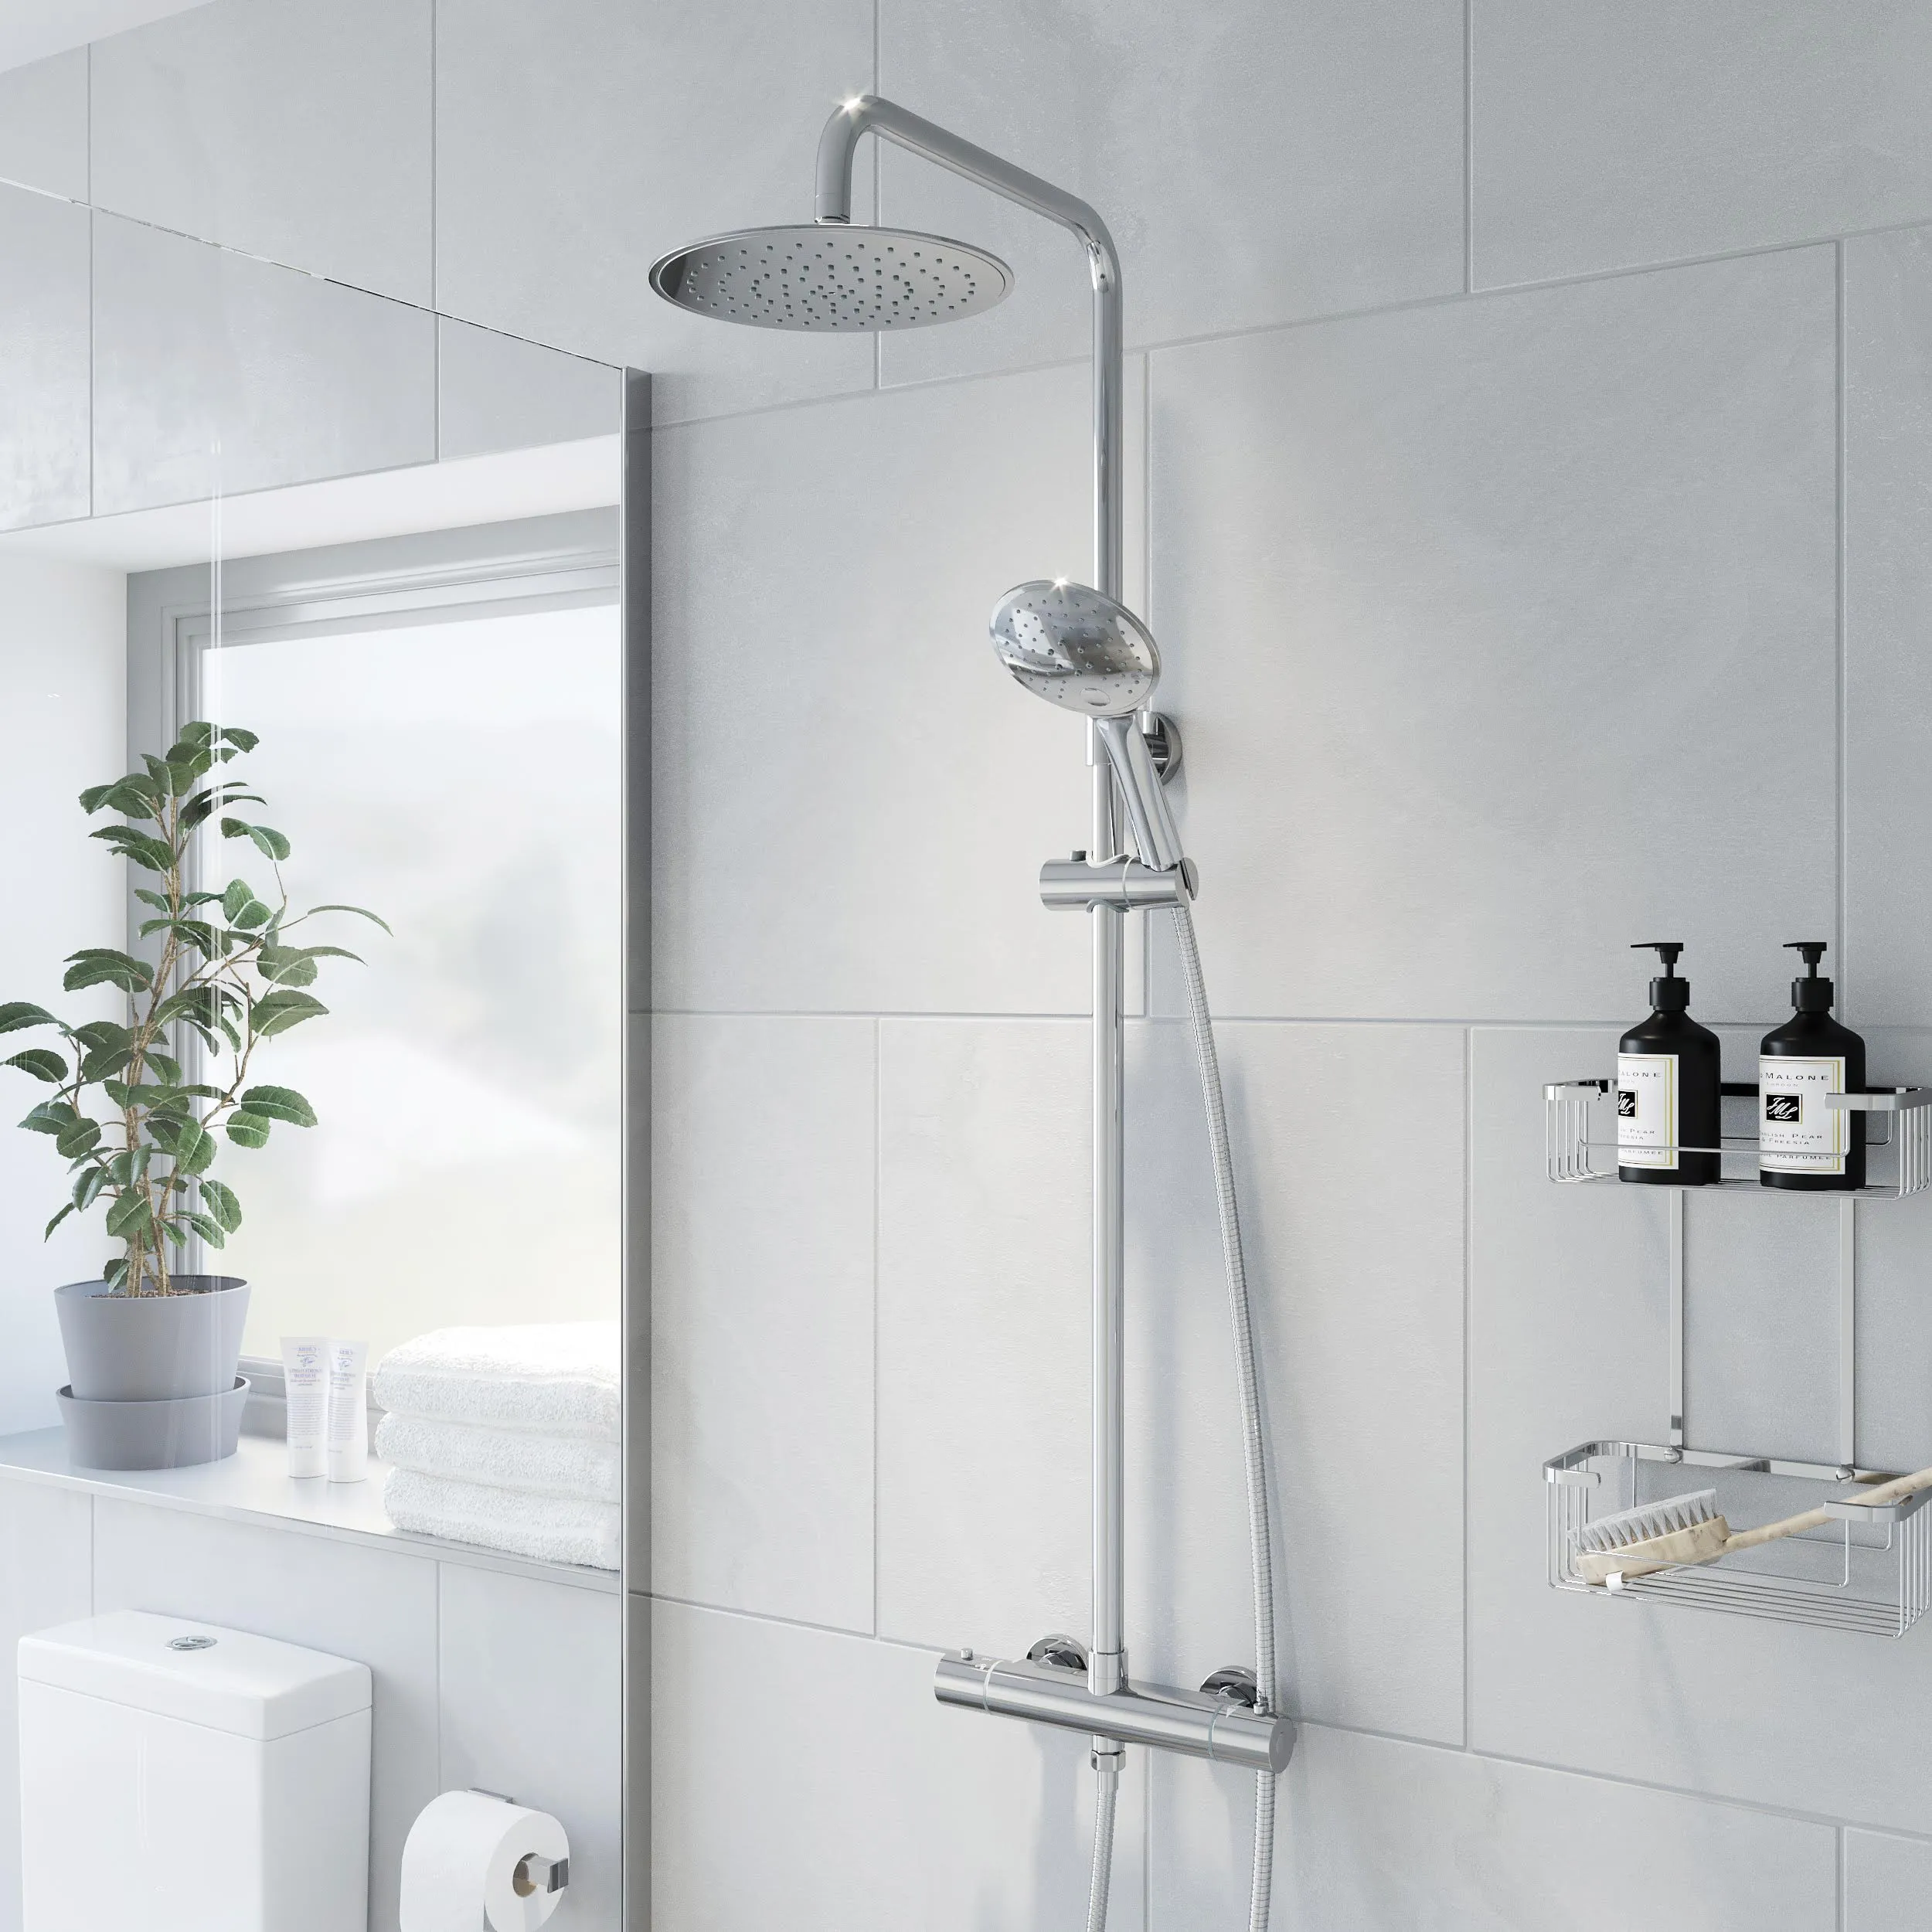 Merano Cool Touch Thermostatic Mixer Shower – Round Bar Valve with Round Drench & Adjustable Heads